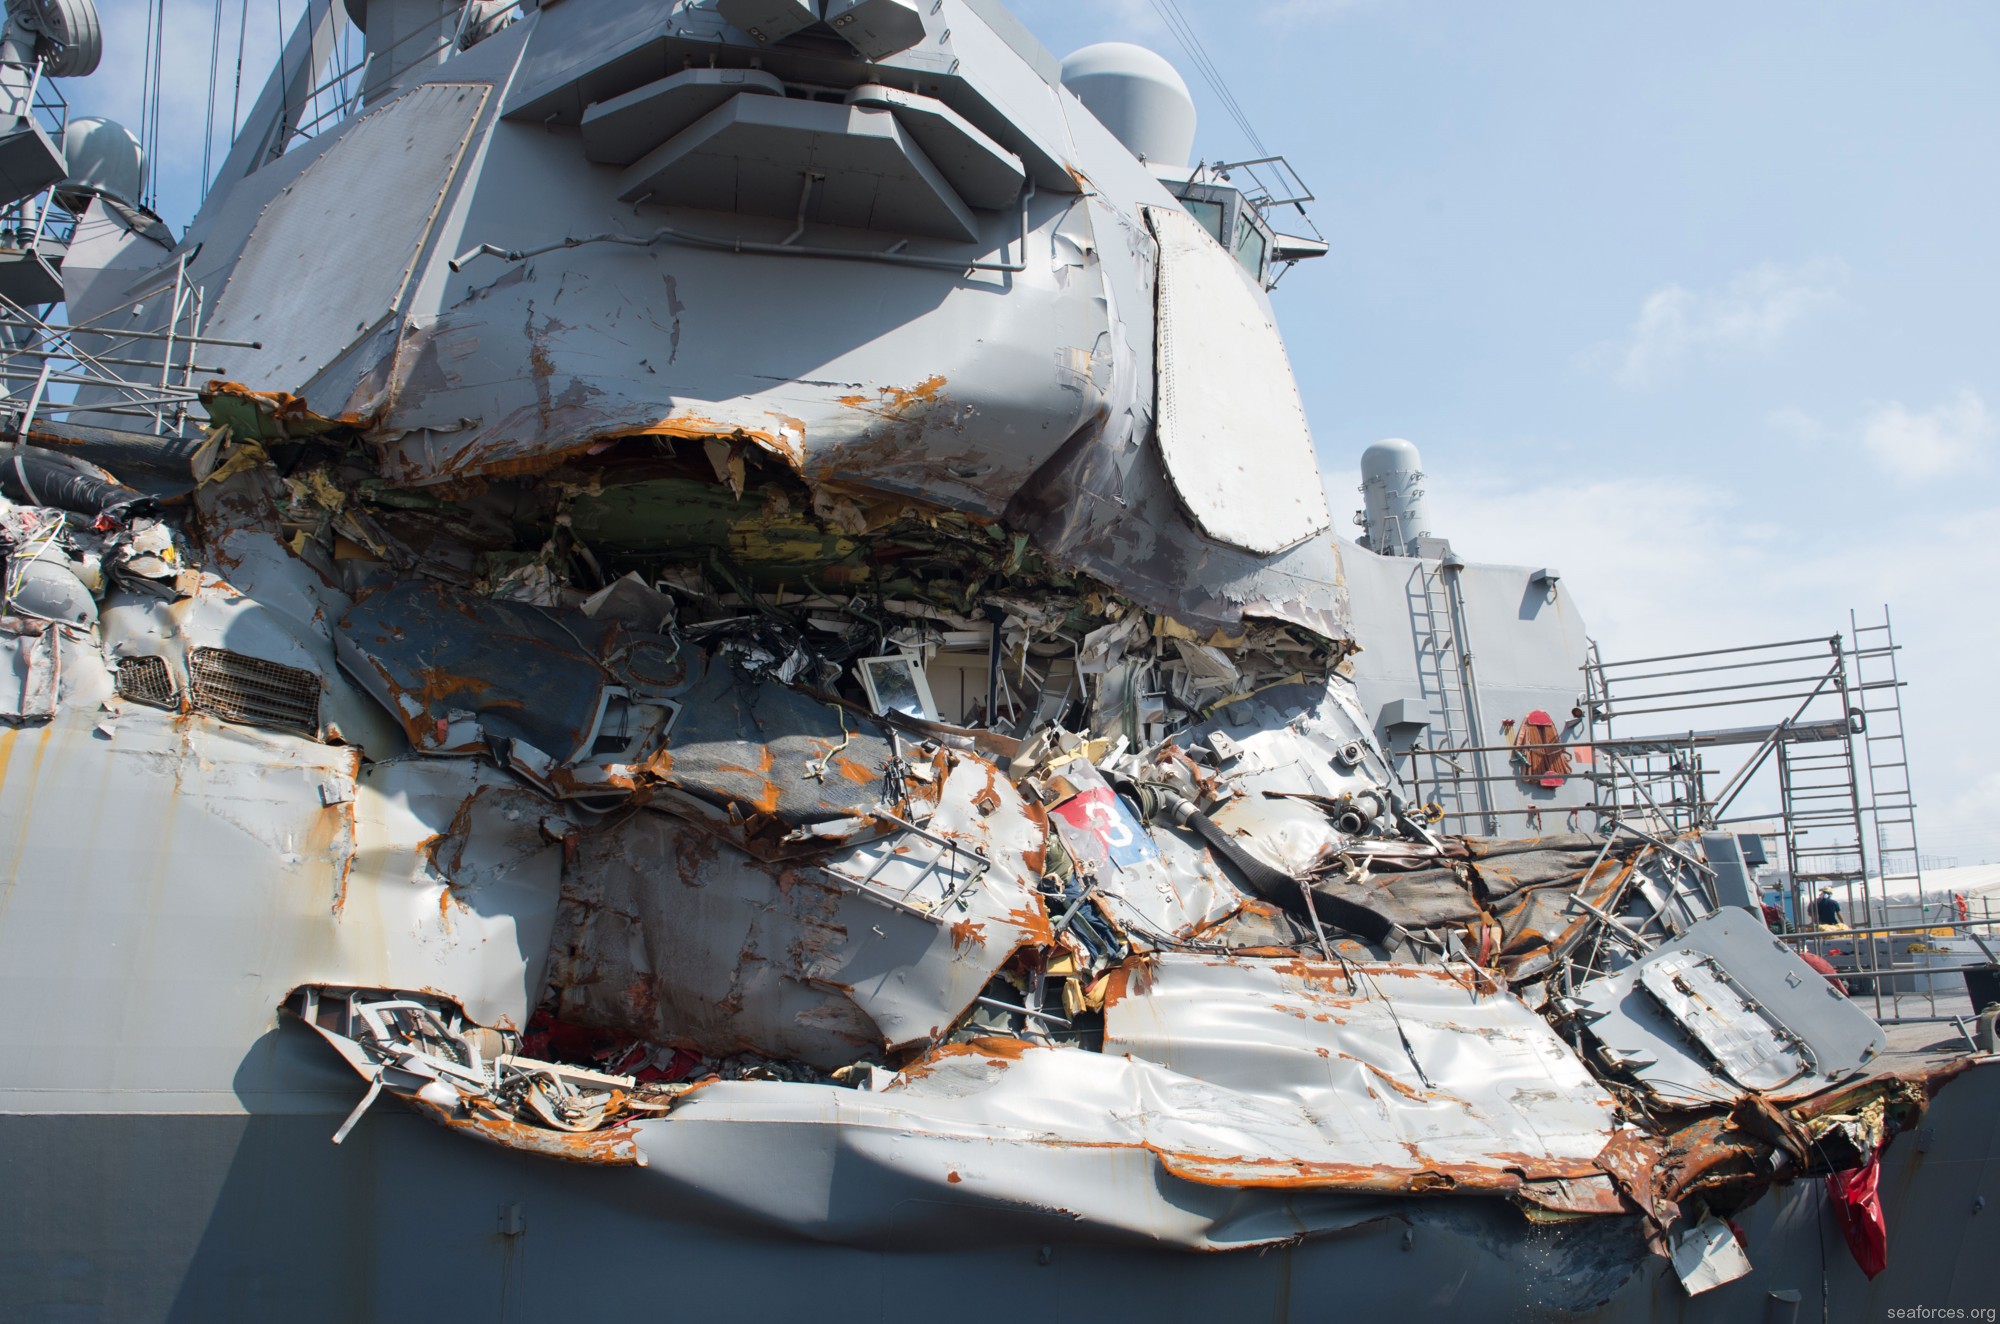 ddg-62 uss fitzgerald guided missile destroyer us navy 147 collosion damage